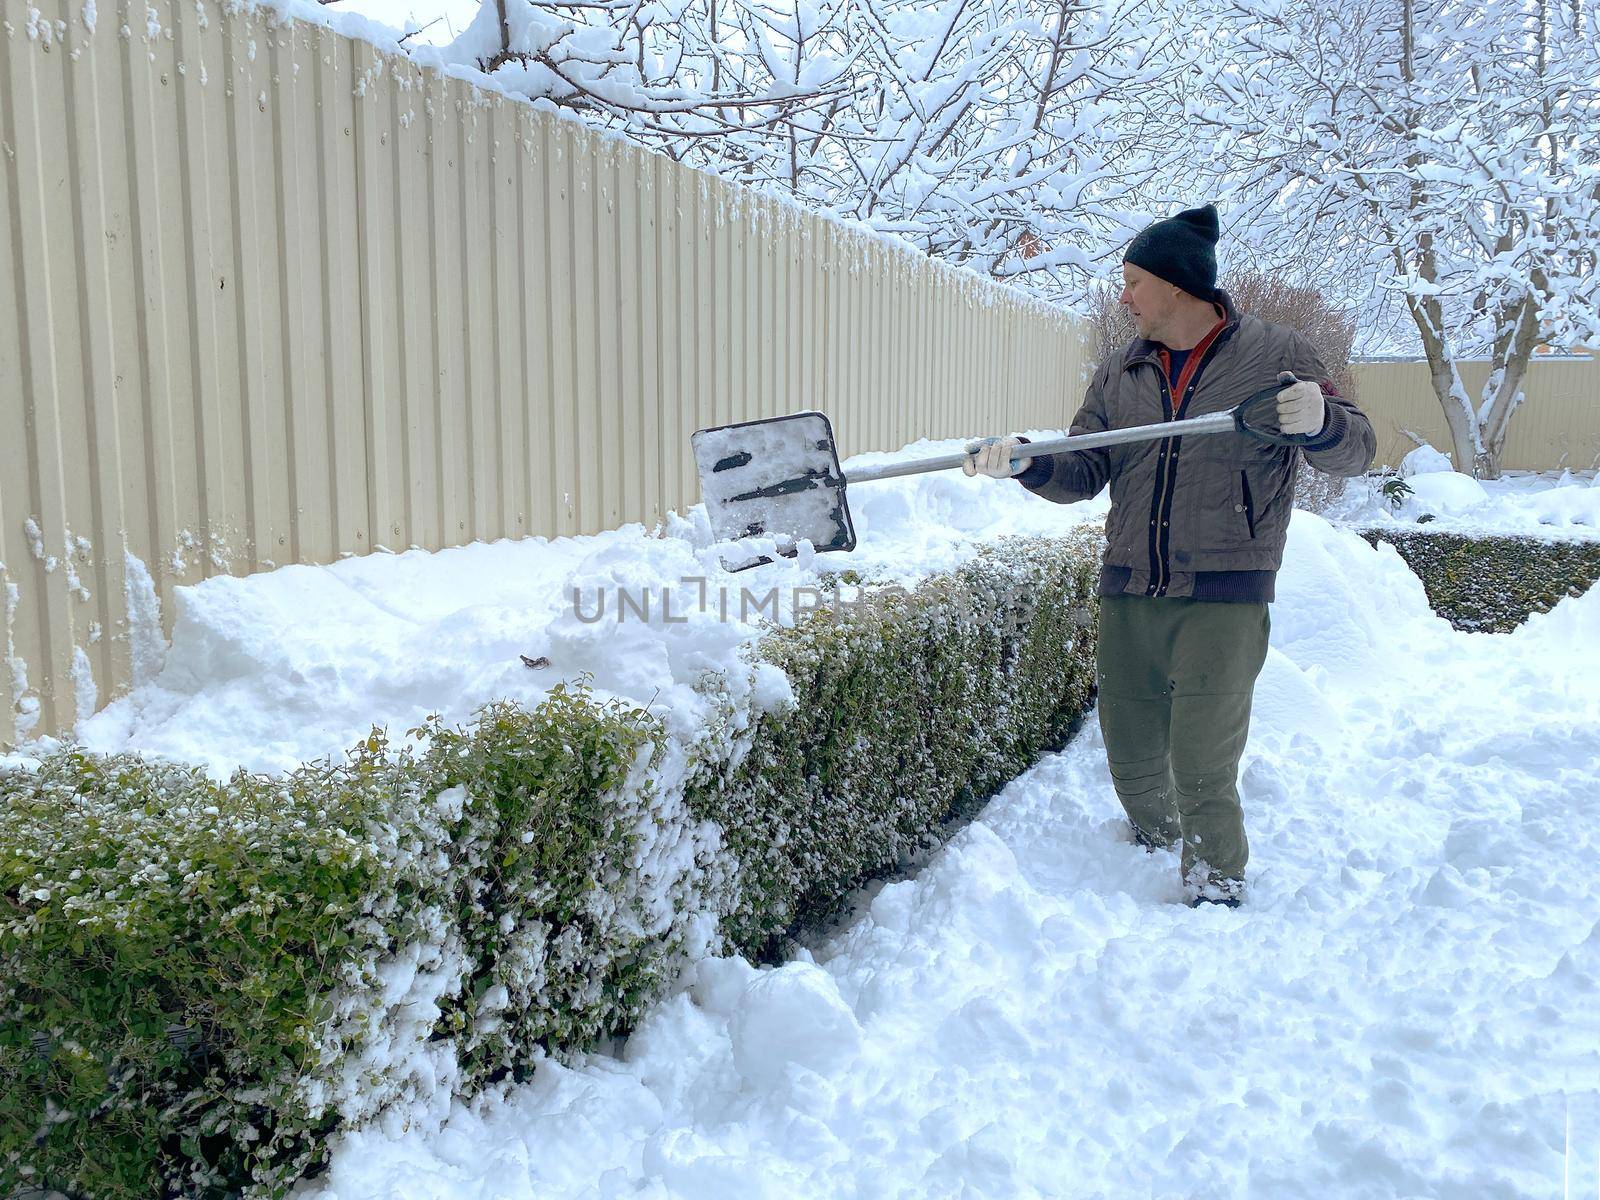 Cleaning trees after a heavy snowfall due to the danger of branches breaking. Winter gardening. A man using a snow shovel shakes snow from privet branches by Proxima13